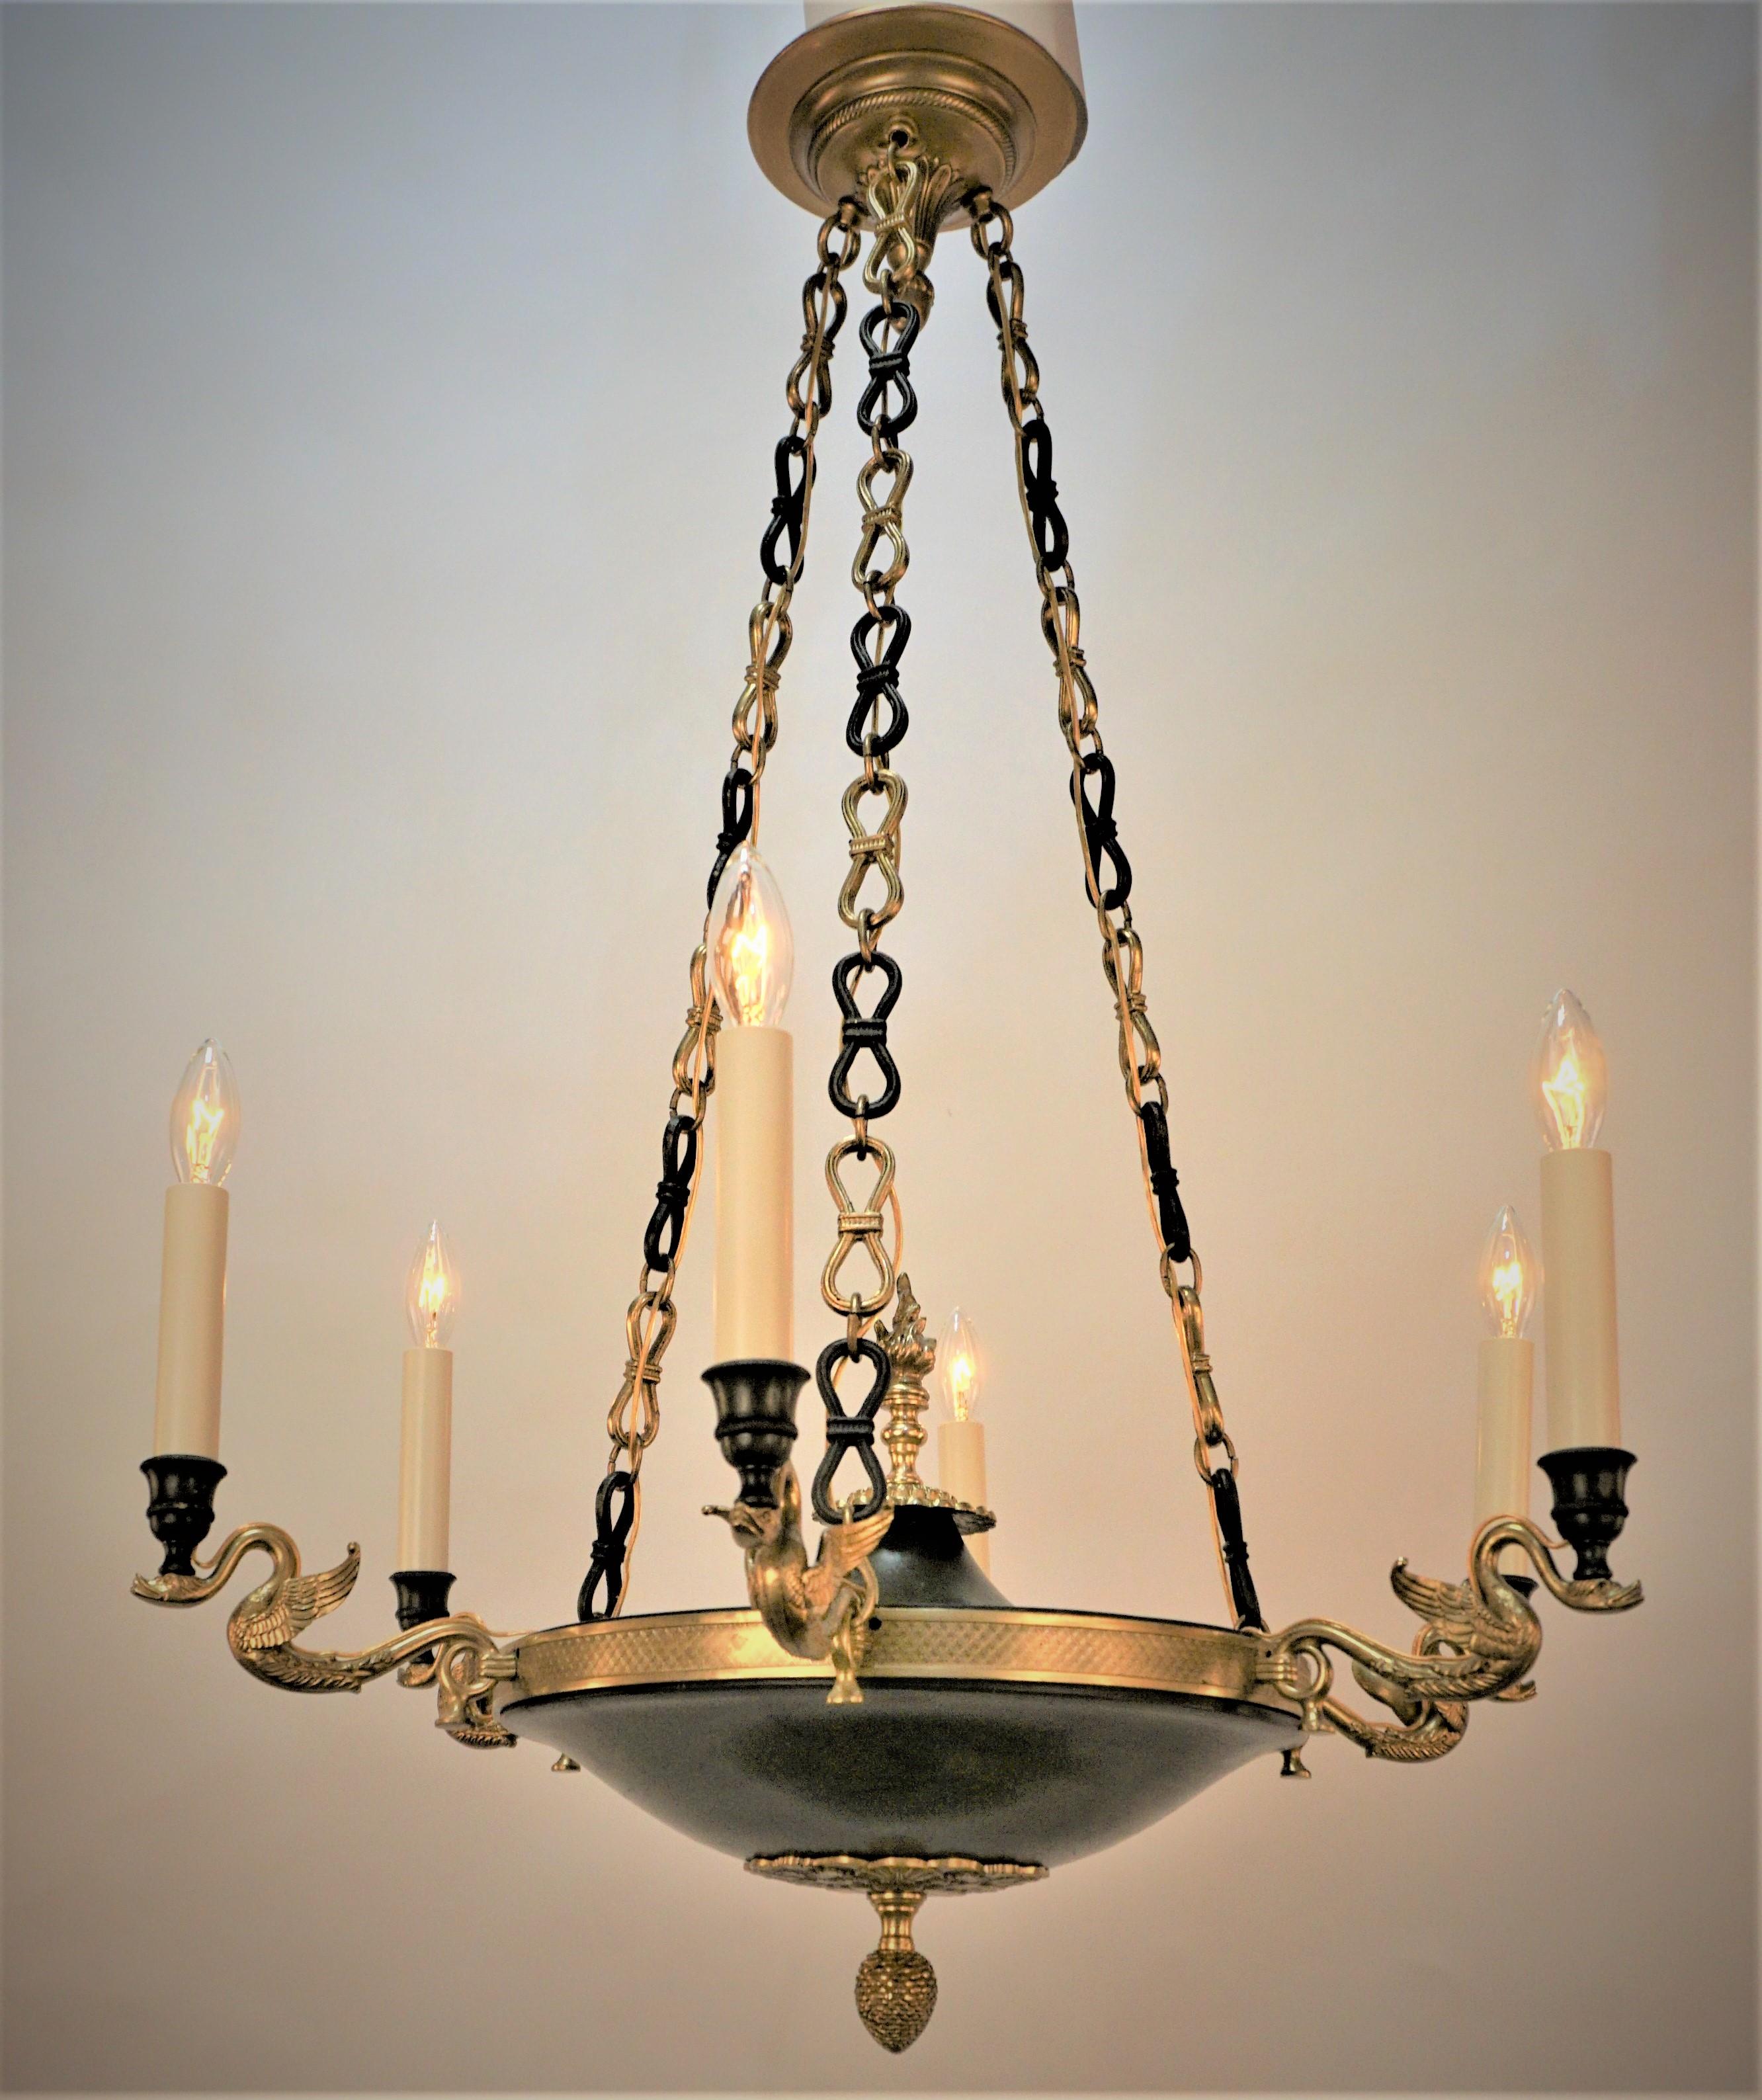 French verdi green and gold bronze empire chandelier with beautiful swan arms.